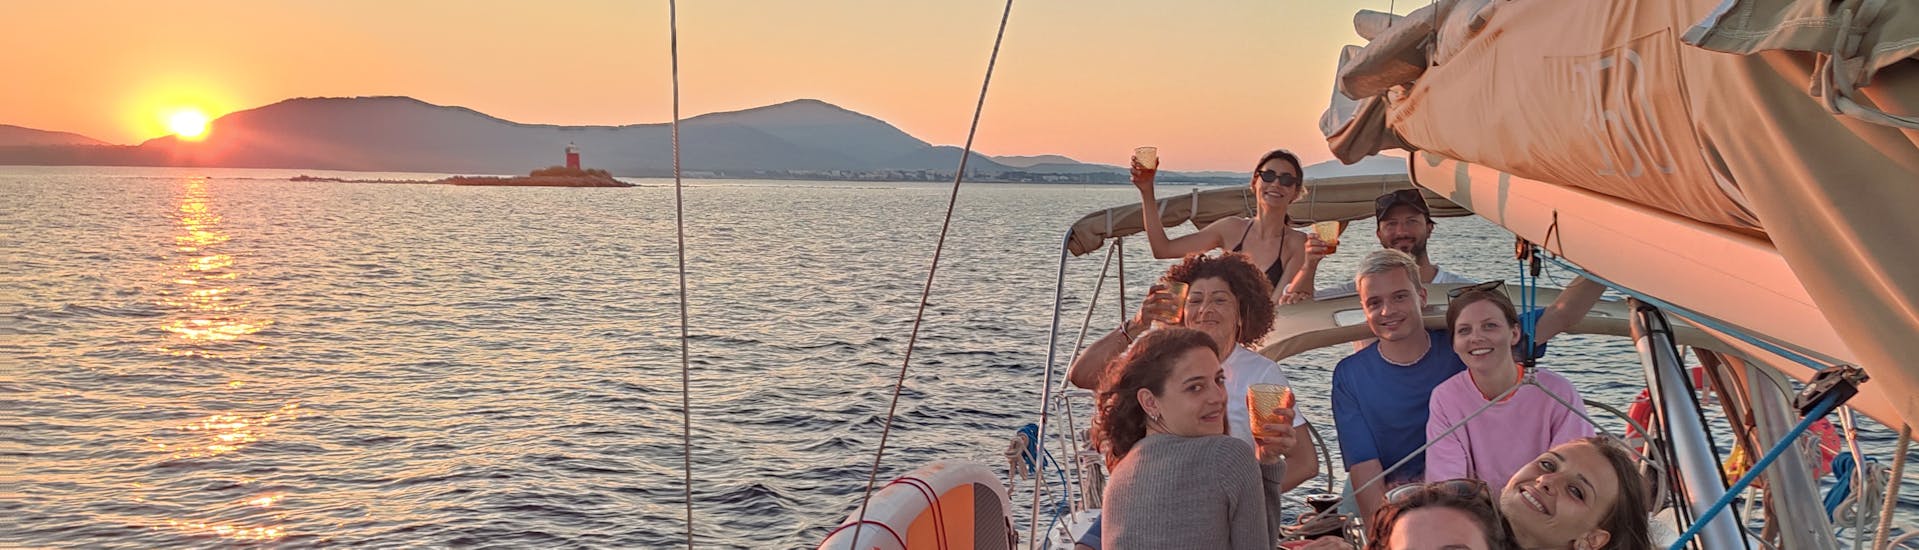 People enjoying the Sunset Sailing Boat Trip around Alghero with Apéritif with Cruise Sail Charter Alghero.